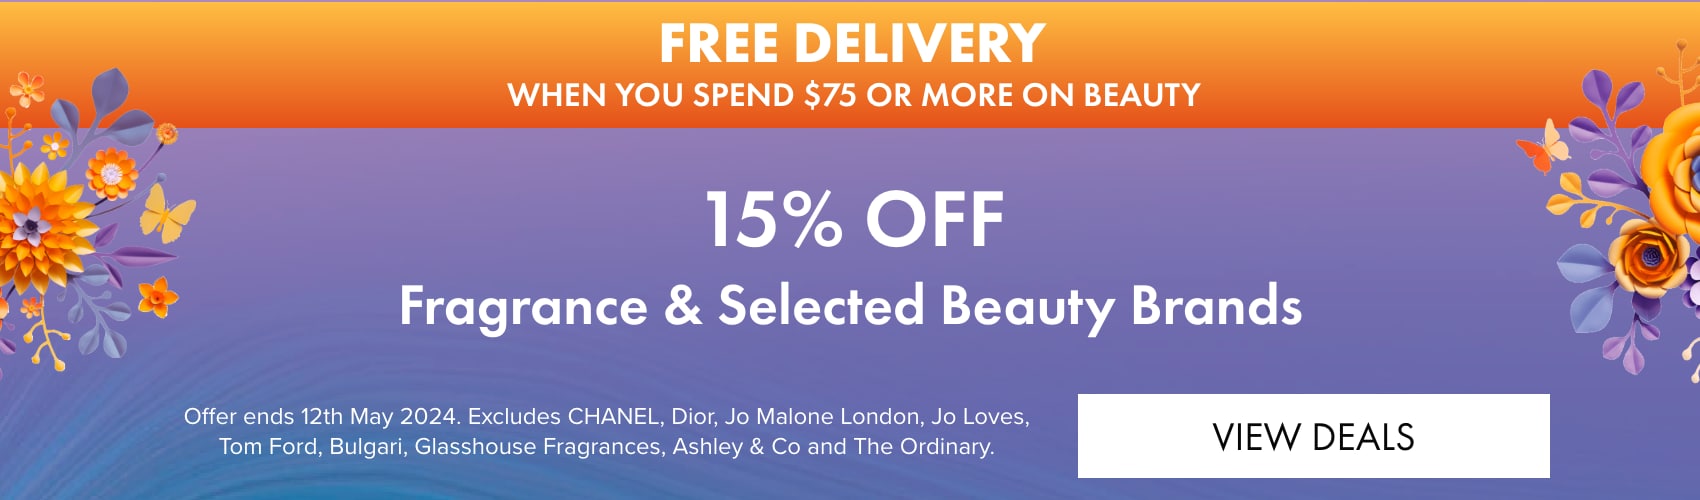 15% OFF Fragrance & Selected Beauty Brands 